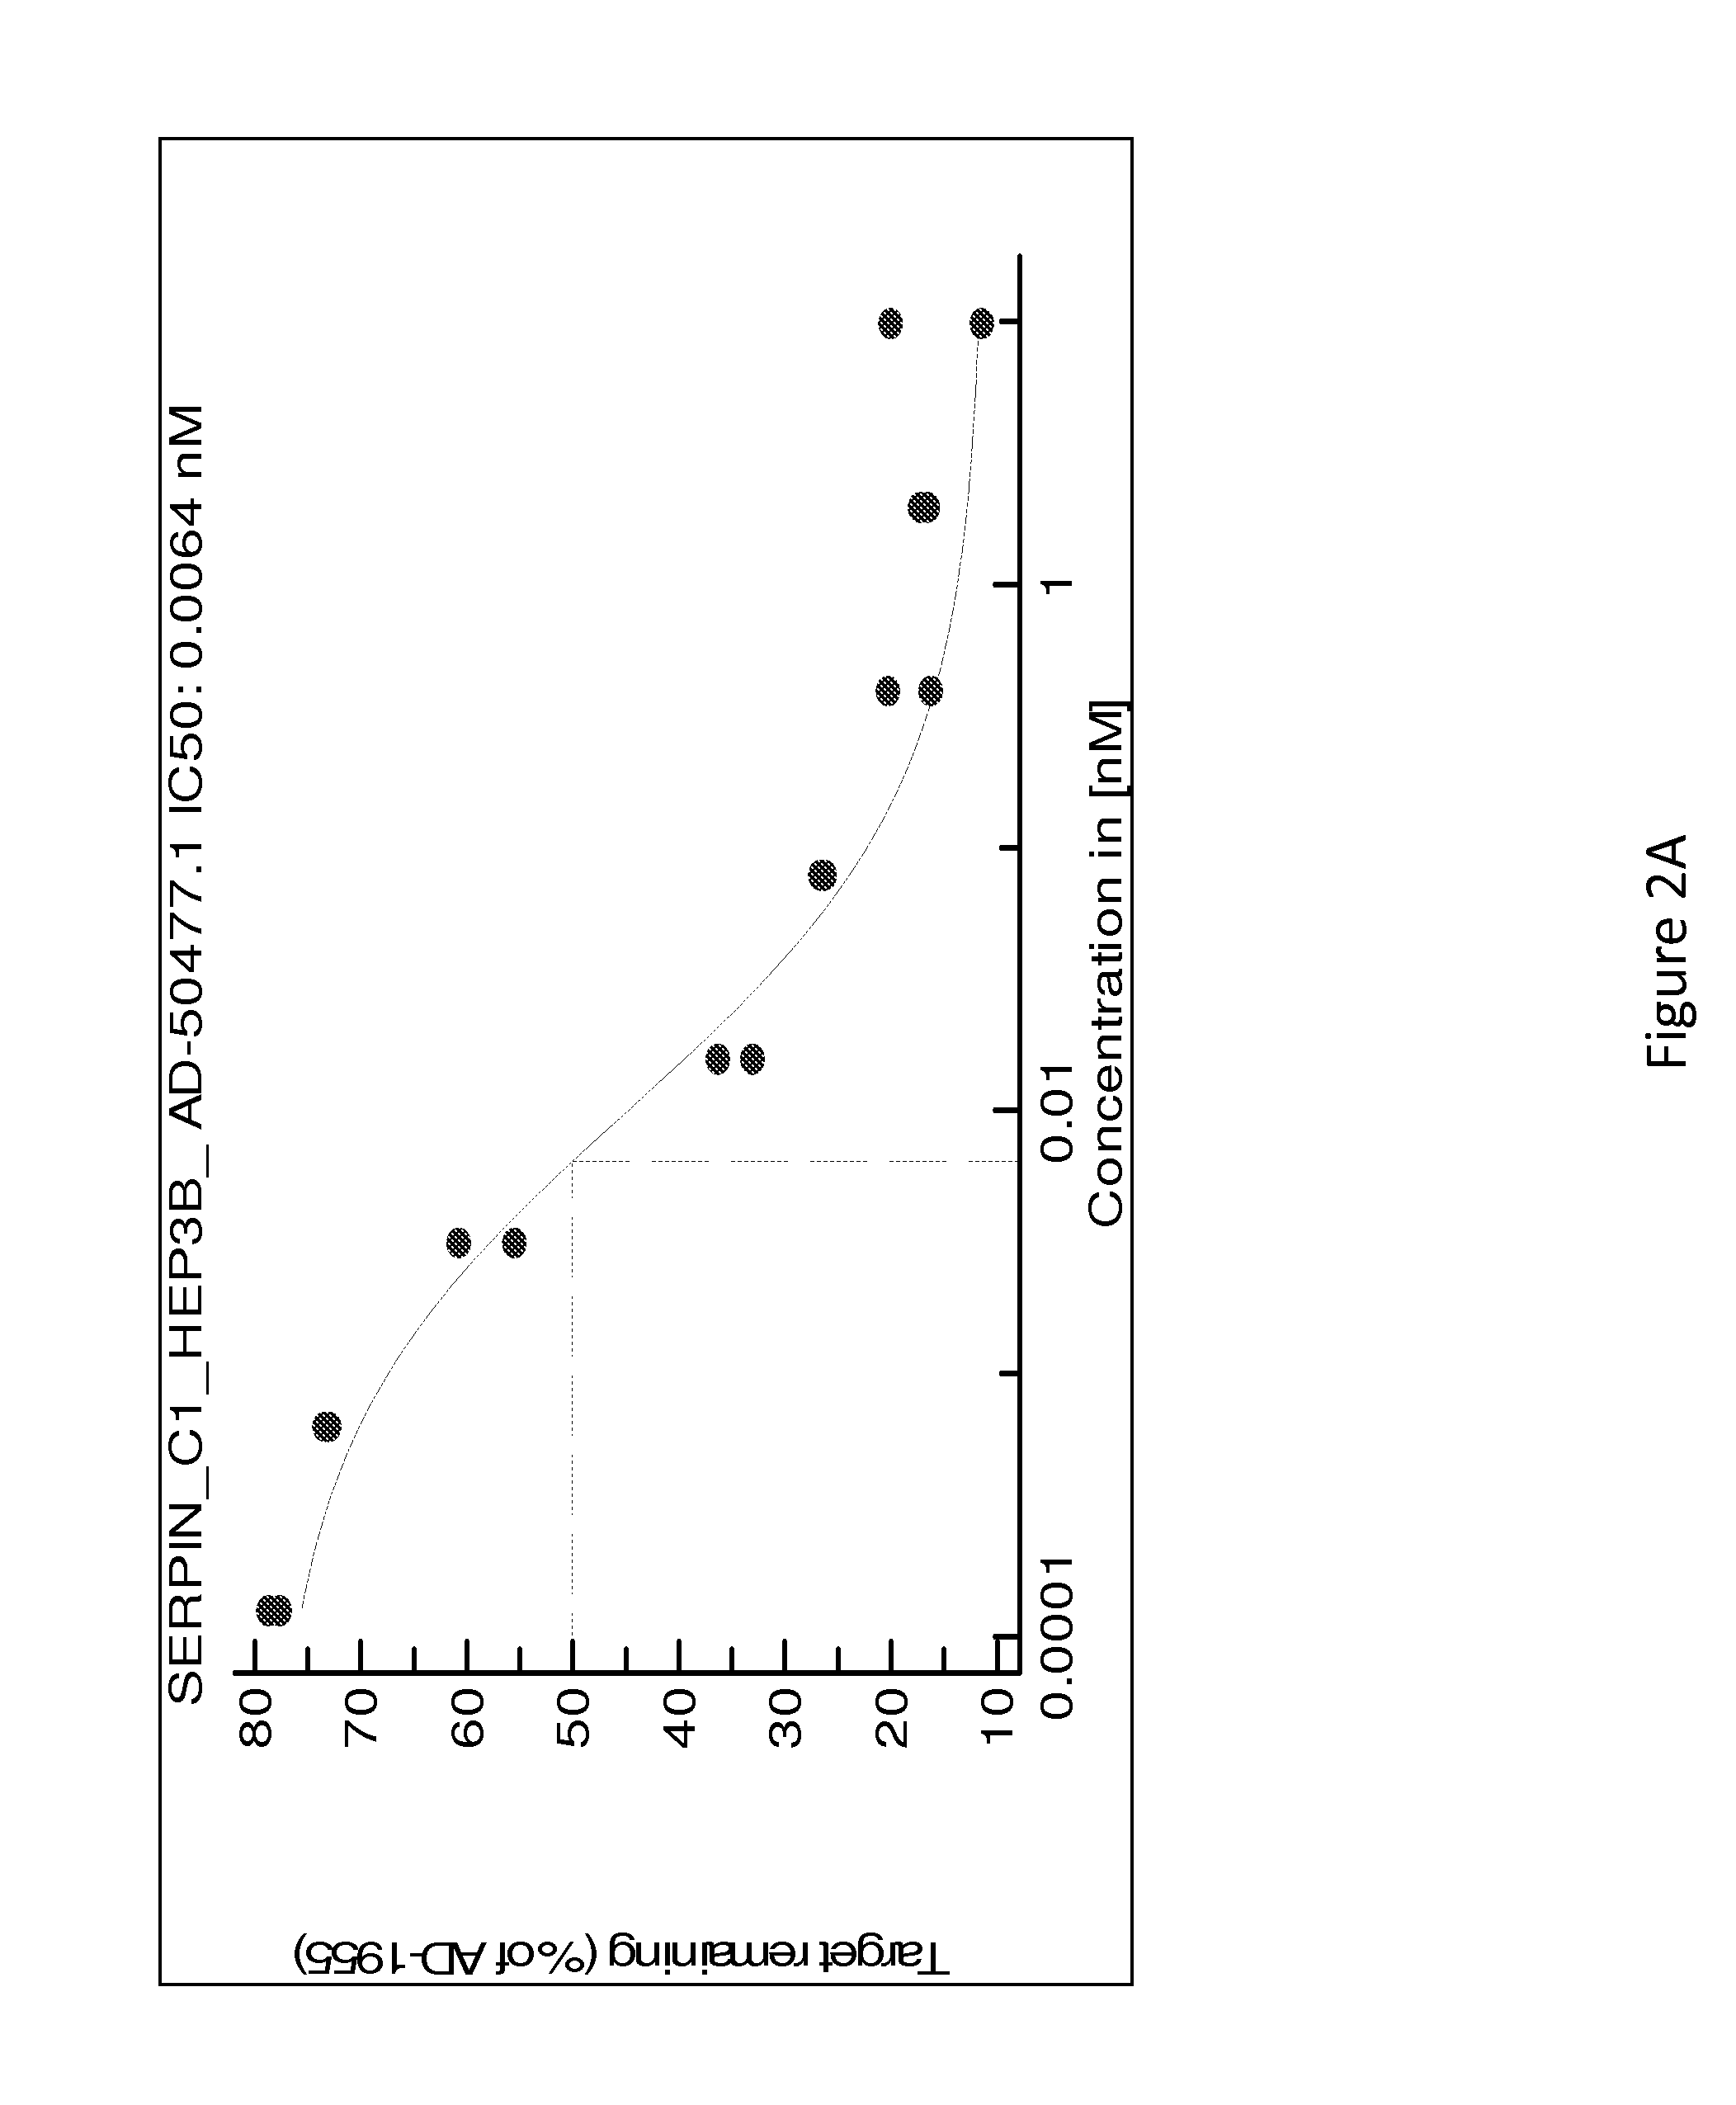 SERPINC1 iRNA COMPOSITIONS AND METHODS OF USE THEREOF